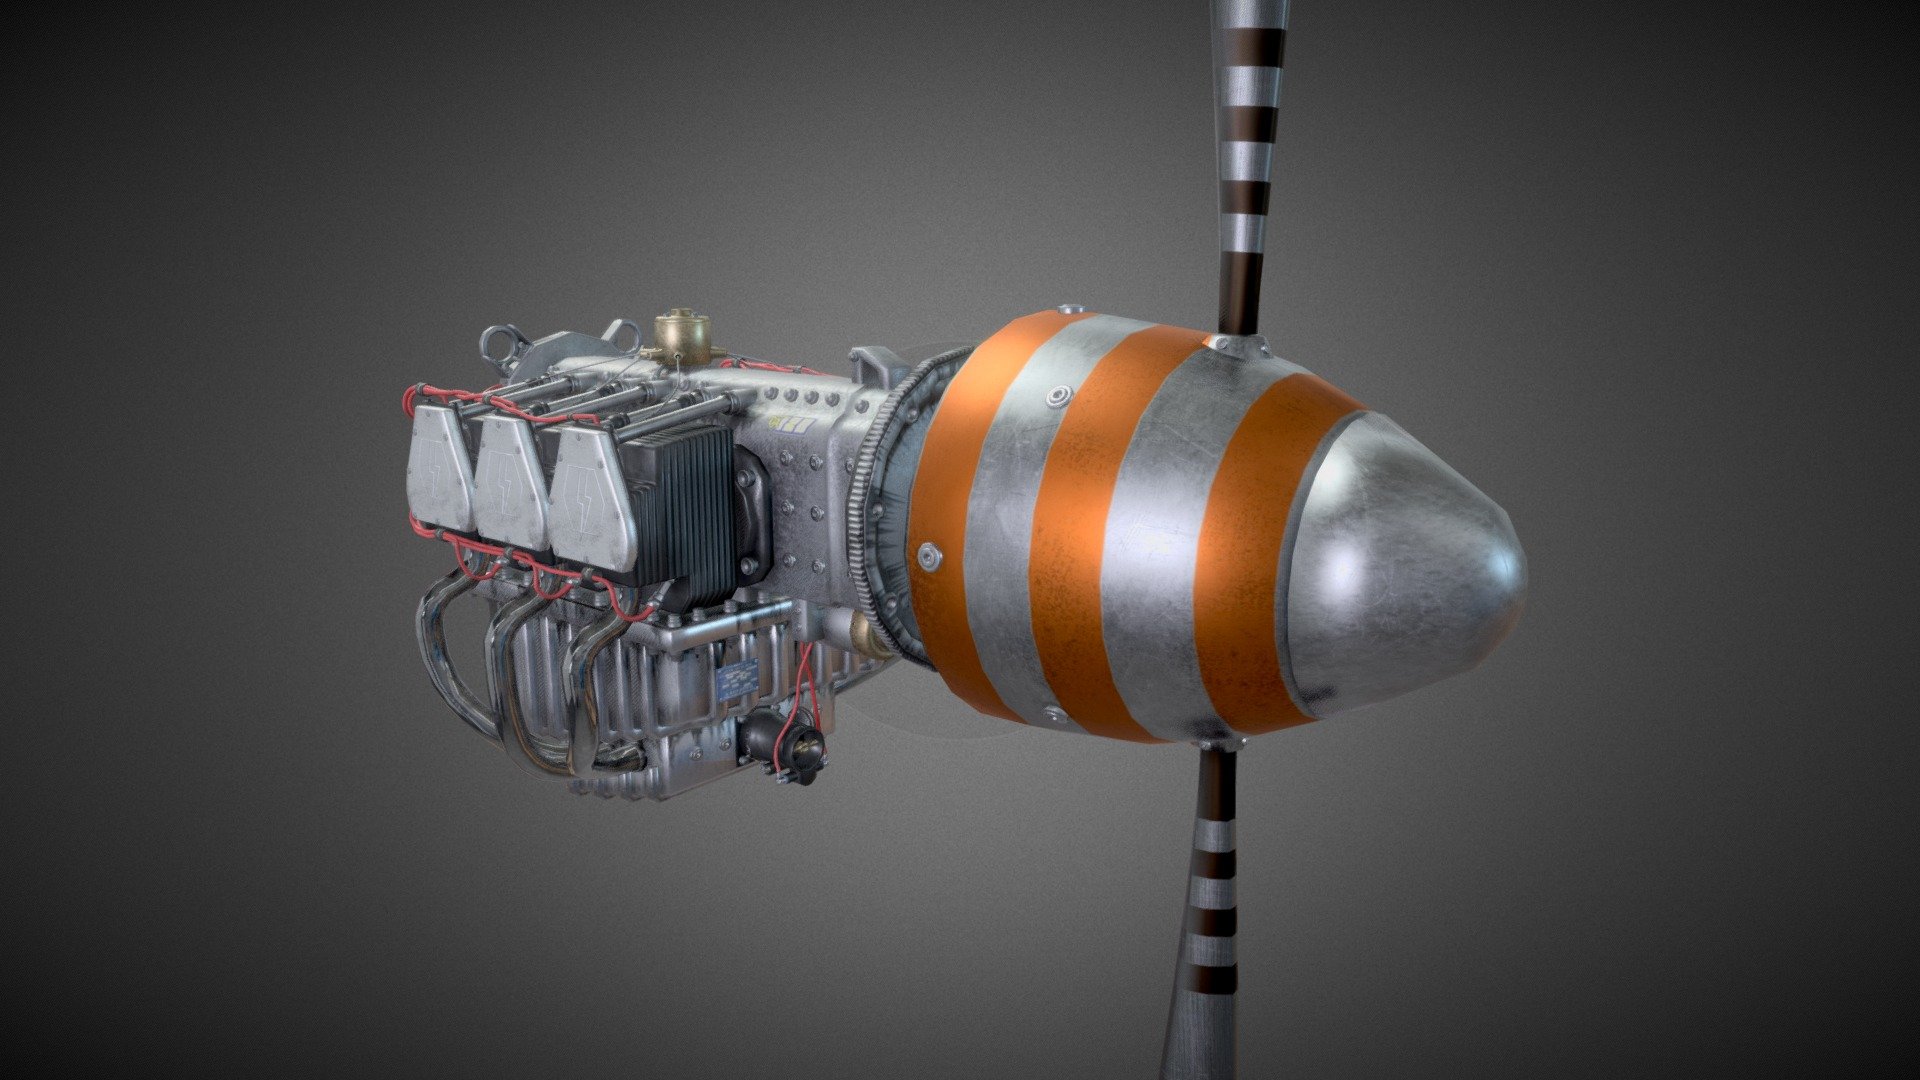 This is a project I have been working on from a few years ago, I am working on modelling the whole aircraft, although while modeling, I wanted to model a airplane engine in fine detail. This took around a few weeks on and off. I am pretty happy with the final outcome. I am still working on the stunt plane as a whole. I thought I was share this project as a side off. 

3D modelling/Baking: 3dsMax2020

Tris:
Engine: 109,703
Propeller: 6,7123
Total: 116,826

Unwrap: 1x 4096x4096 pixels

Texturing: Quixel Mixer (base textures) Photoshop CC (detail/editing)

Rendering: Marmoset Tool Bag 3 and Sketchfab.

Luke Thomas Day  - Stunt Plane Engine_Propeller - 3D model by LukeThomasDay (@LukeiSBest) 3d model